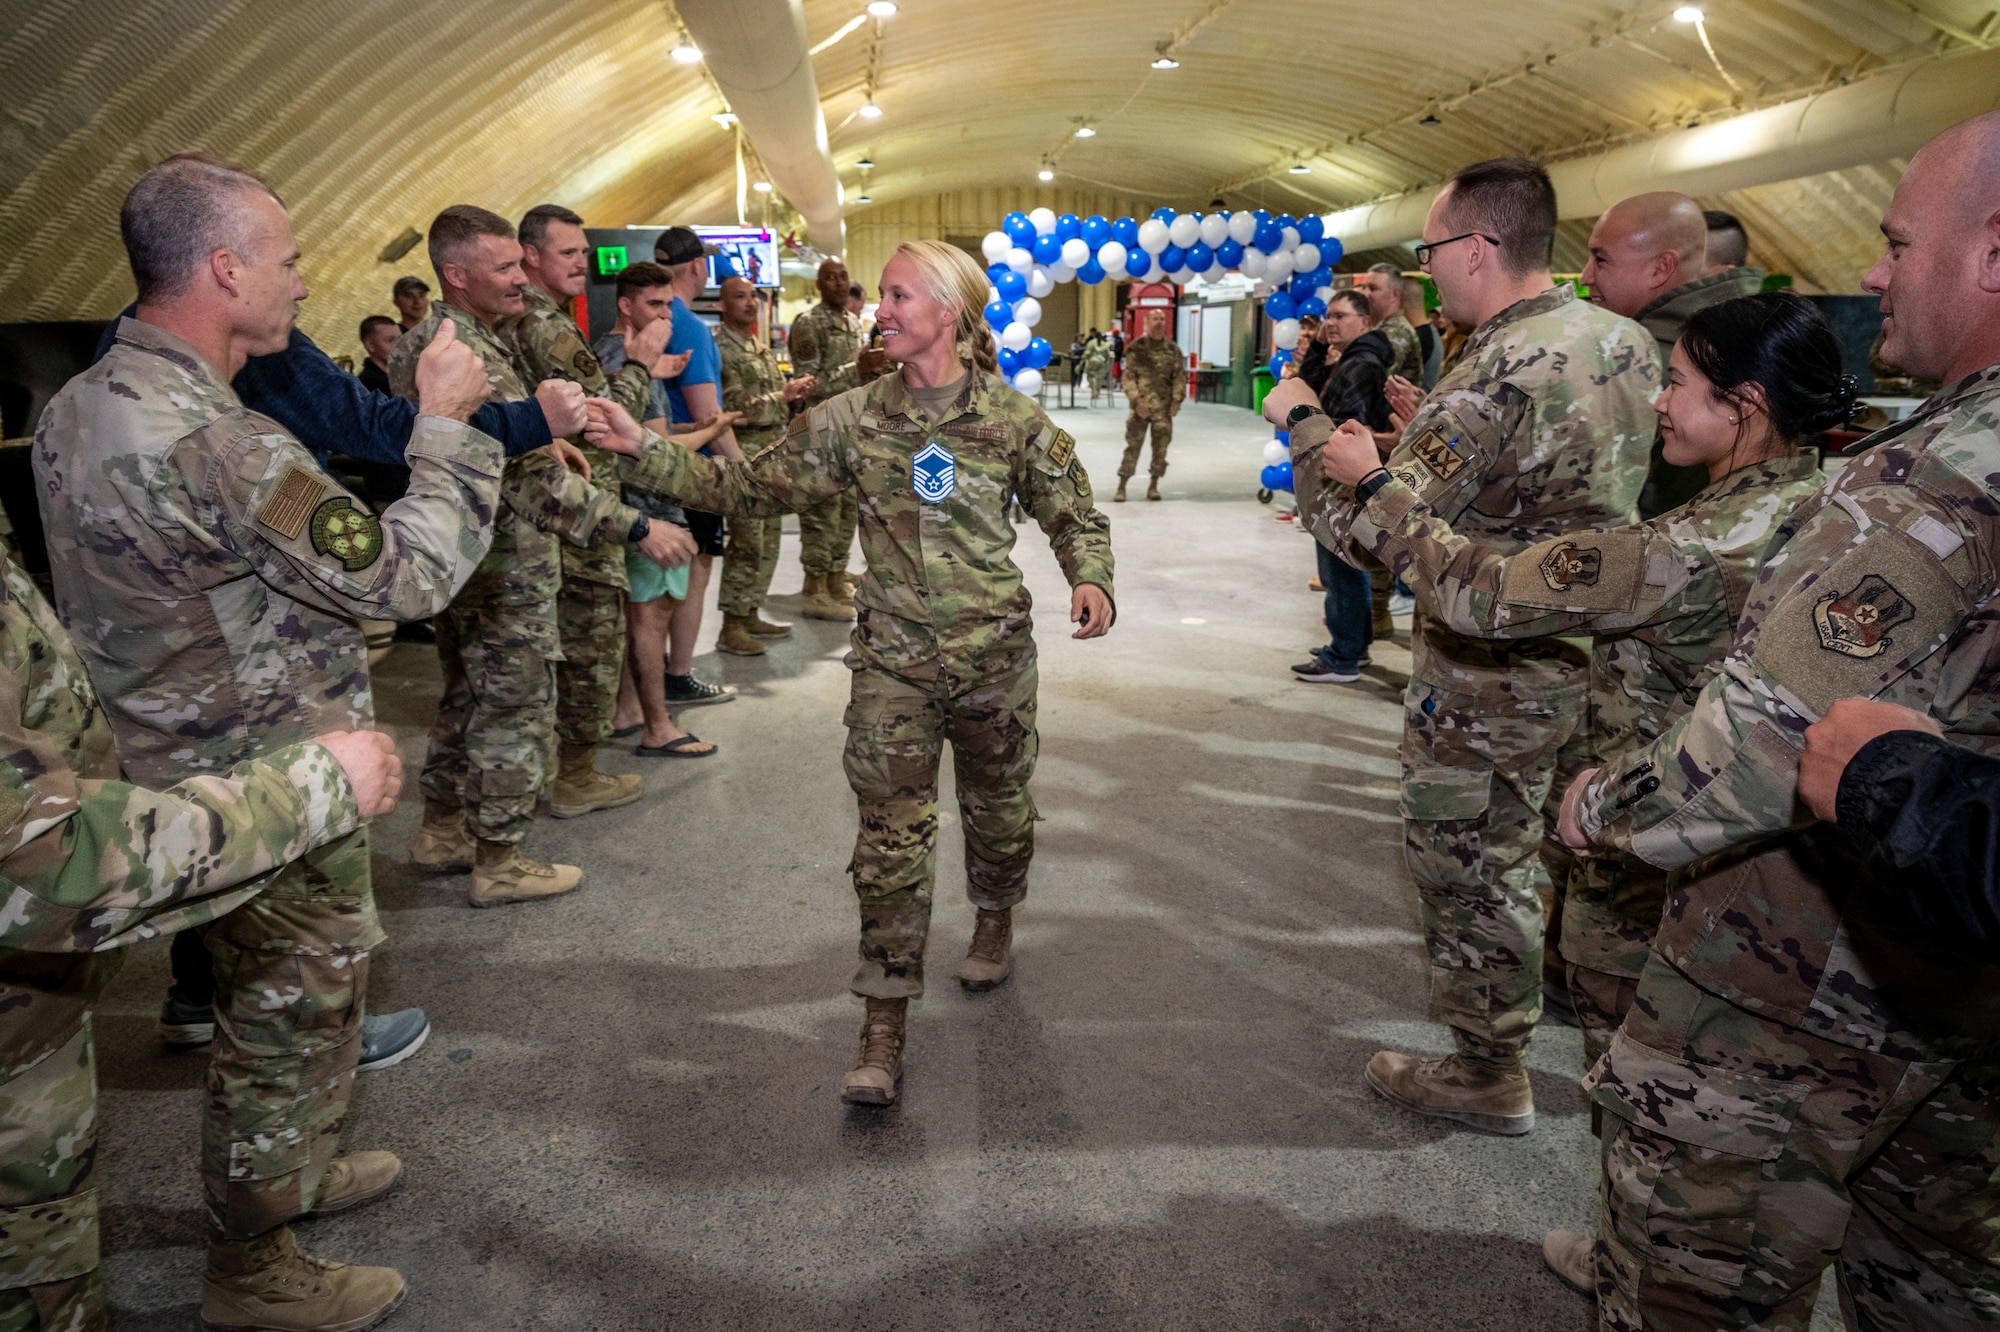 Master Sgt. Cassandra Moore, 55th Expeditionary Fighter Generation Squadron, walks toward the stage receiving congratulatory fist bumps from fellow Red Tails at the 332d Air Expeditionary Wing senior master sergeant release party March 19, 2022, at an undisclosed location in Southwest Asia. Moore was one of six senior master sergeant selects from the 332d AEW and one of 1,433 selects for the Air Force. (U.S. Air Force photo by Master Sgt. Christopher Parr)